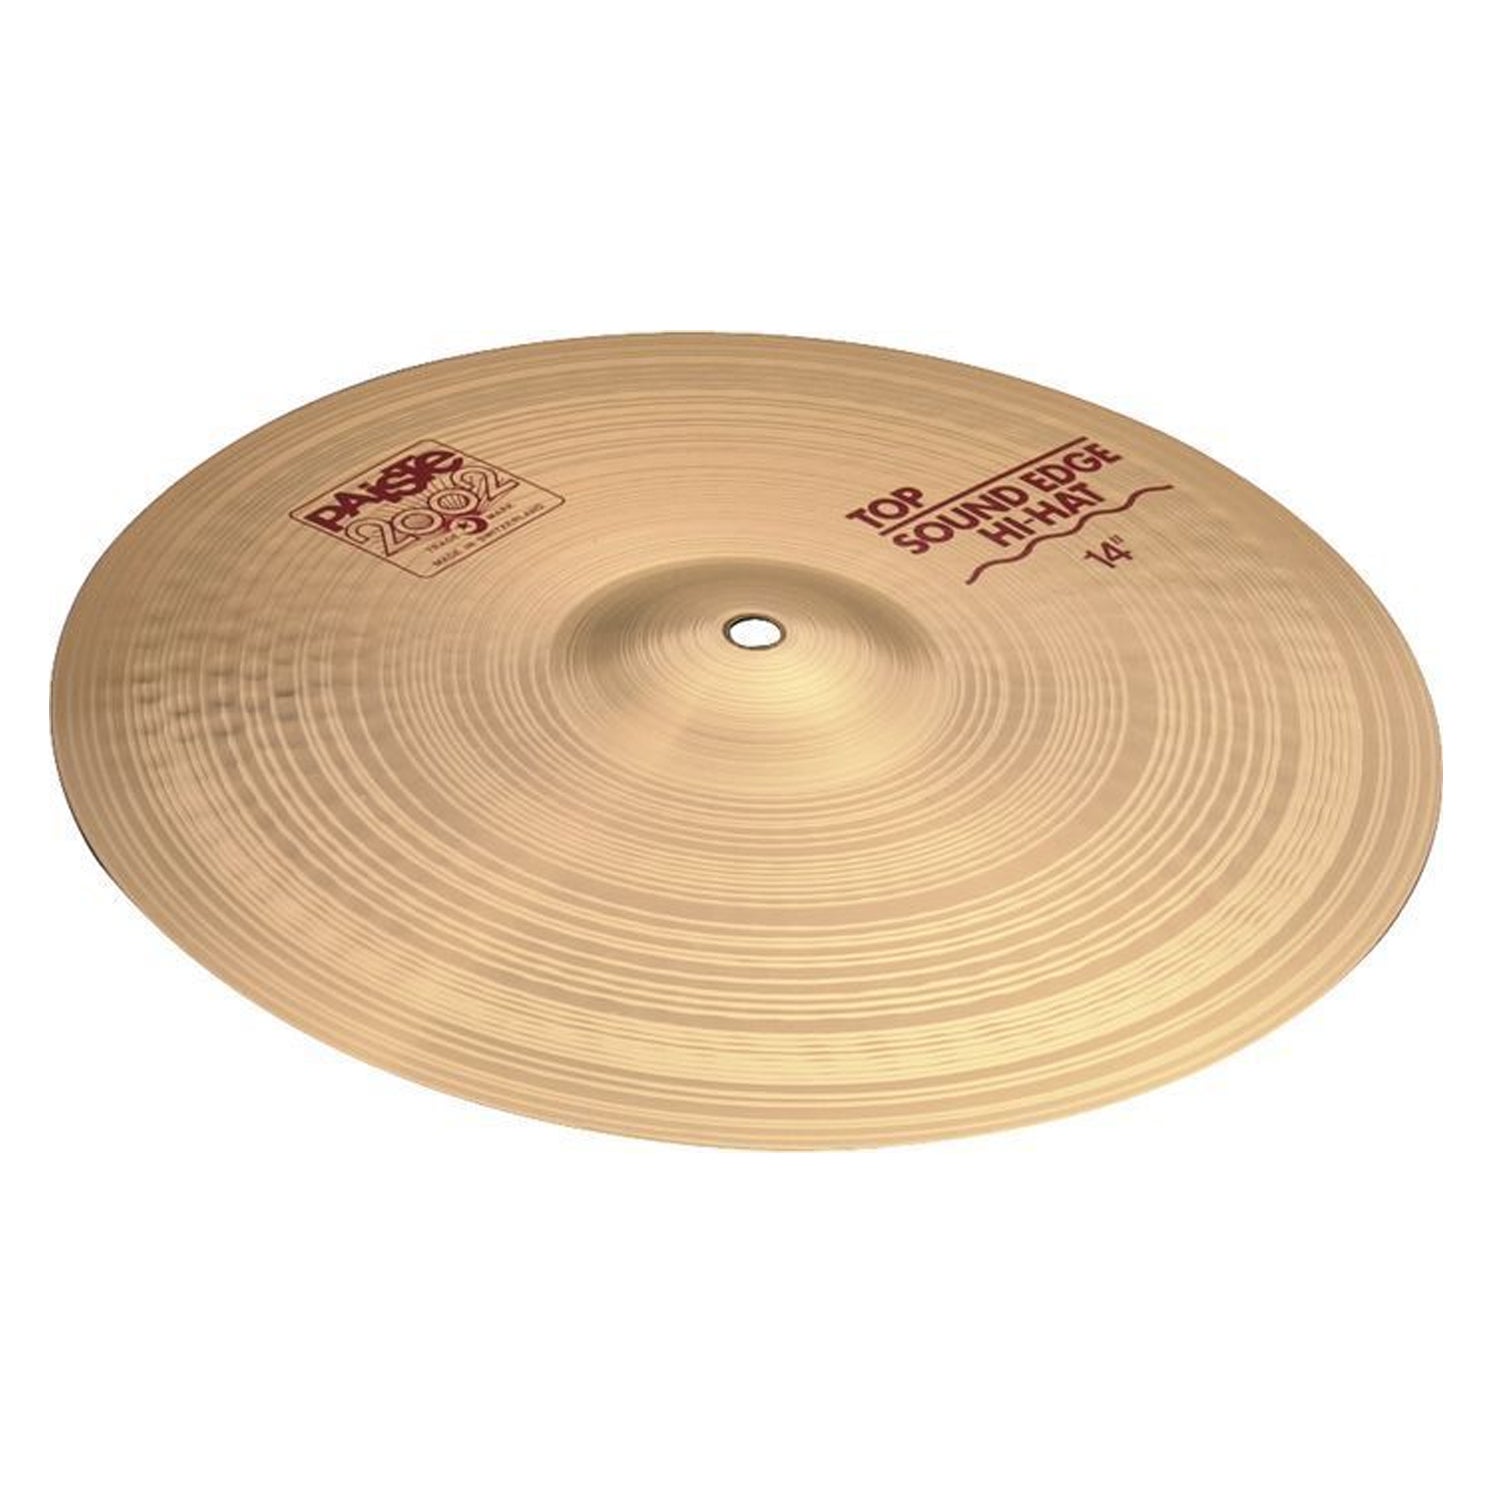 Paiste 1063215 2002 Sound Edge 15 Inch Hi Hat Top Cymbal Only 